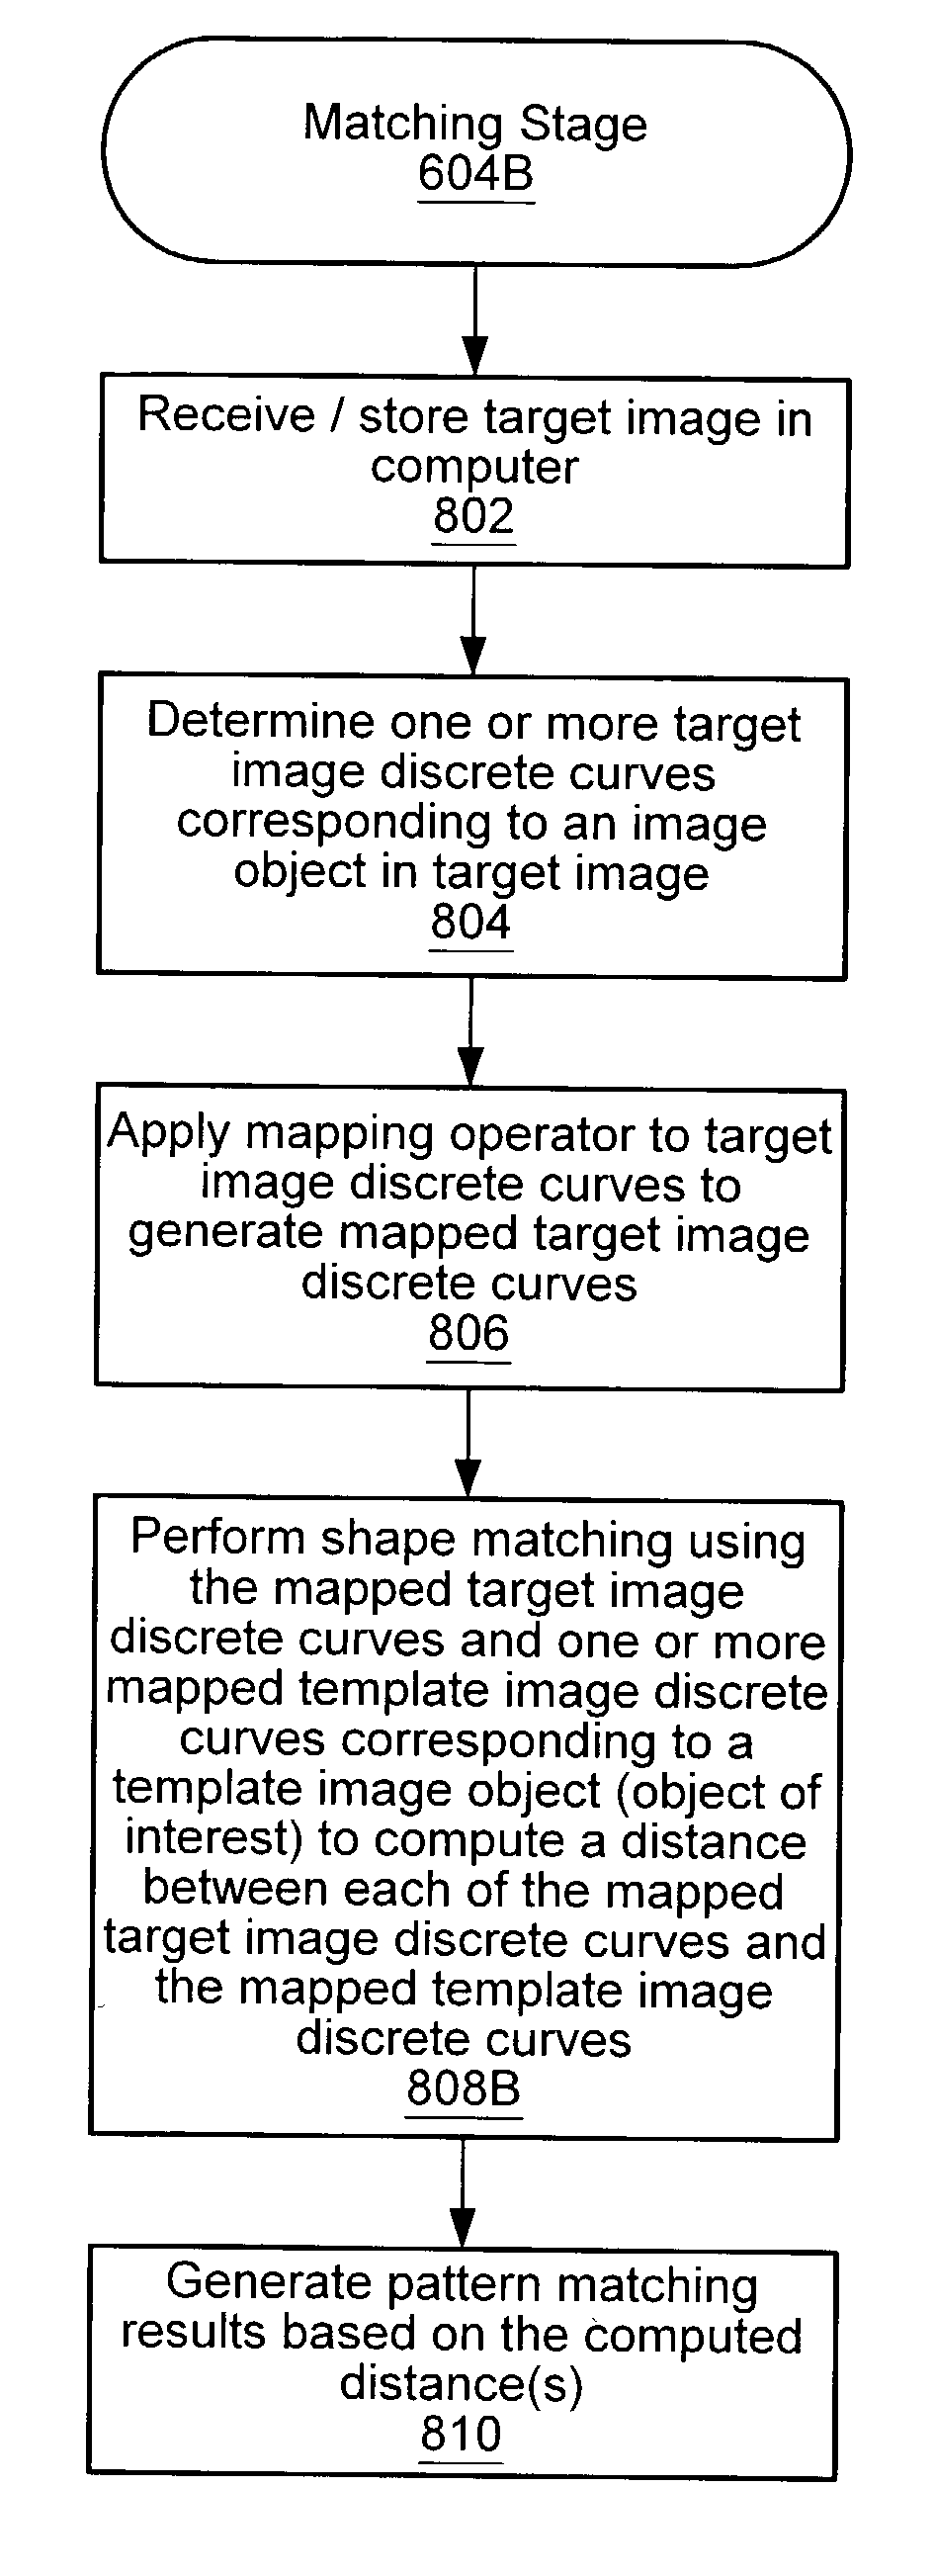 Image pattern matching utilizing discrete curve matching with a mapping operator